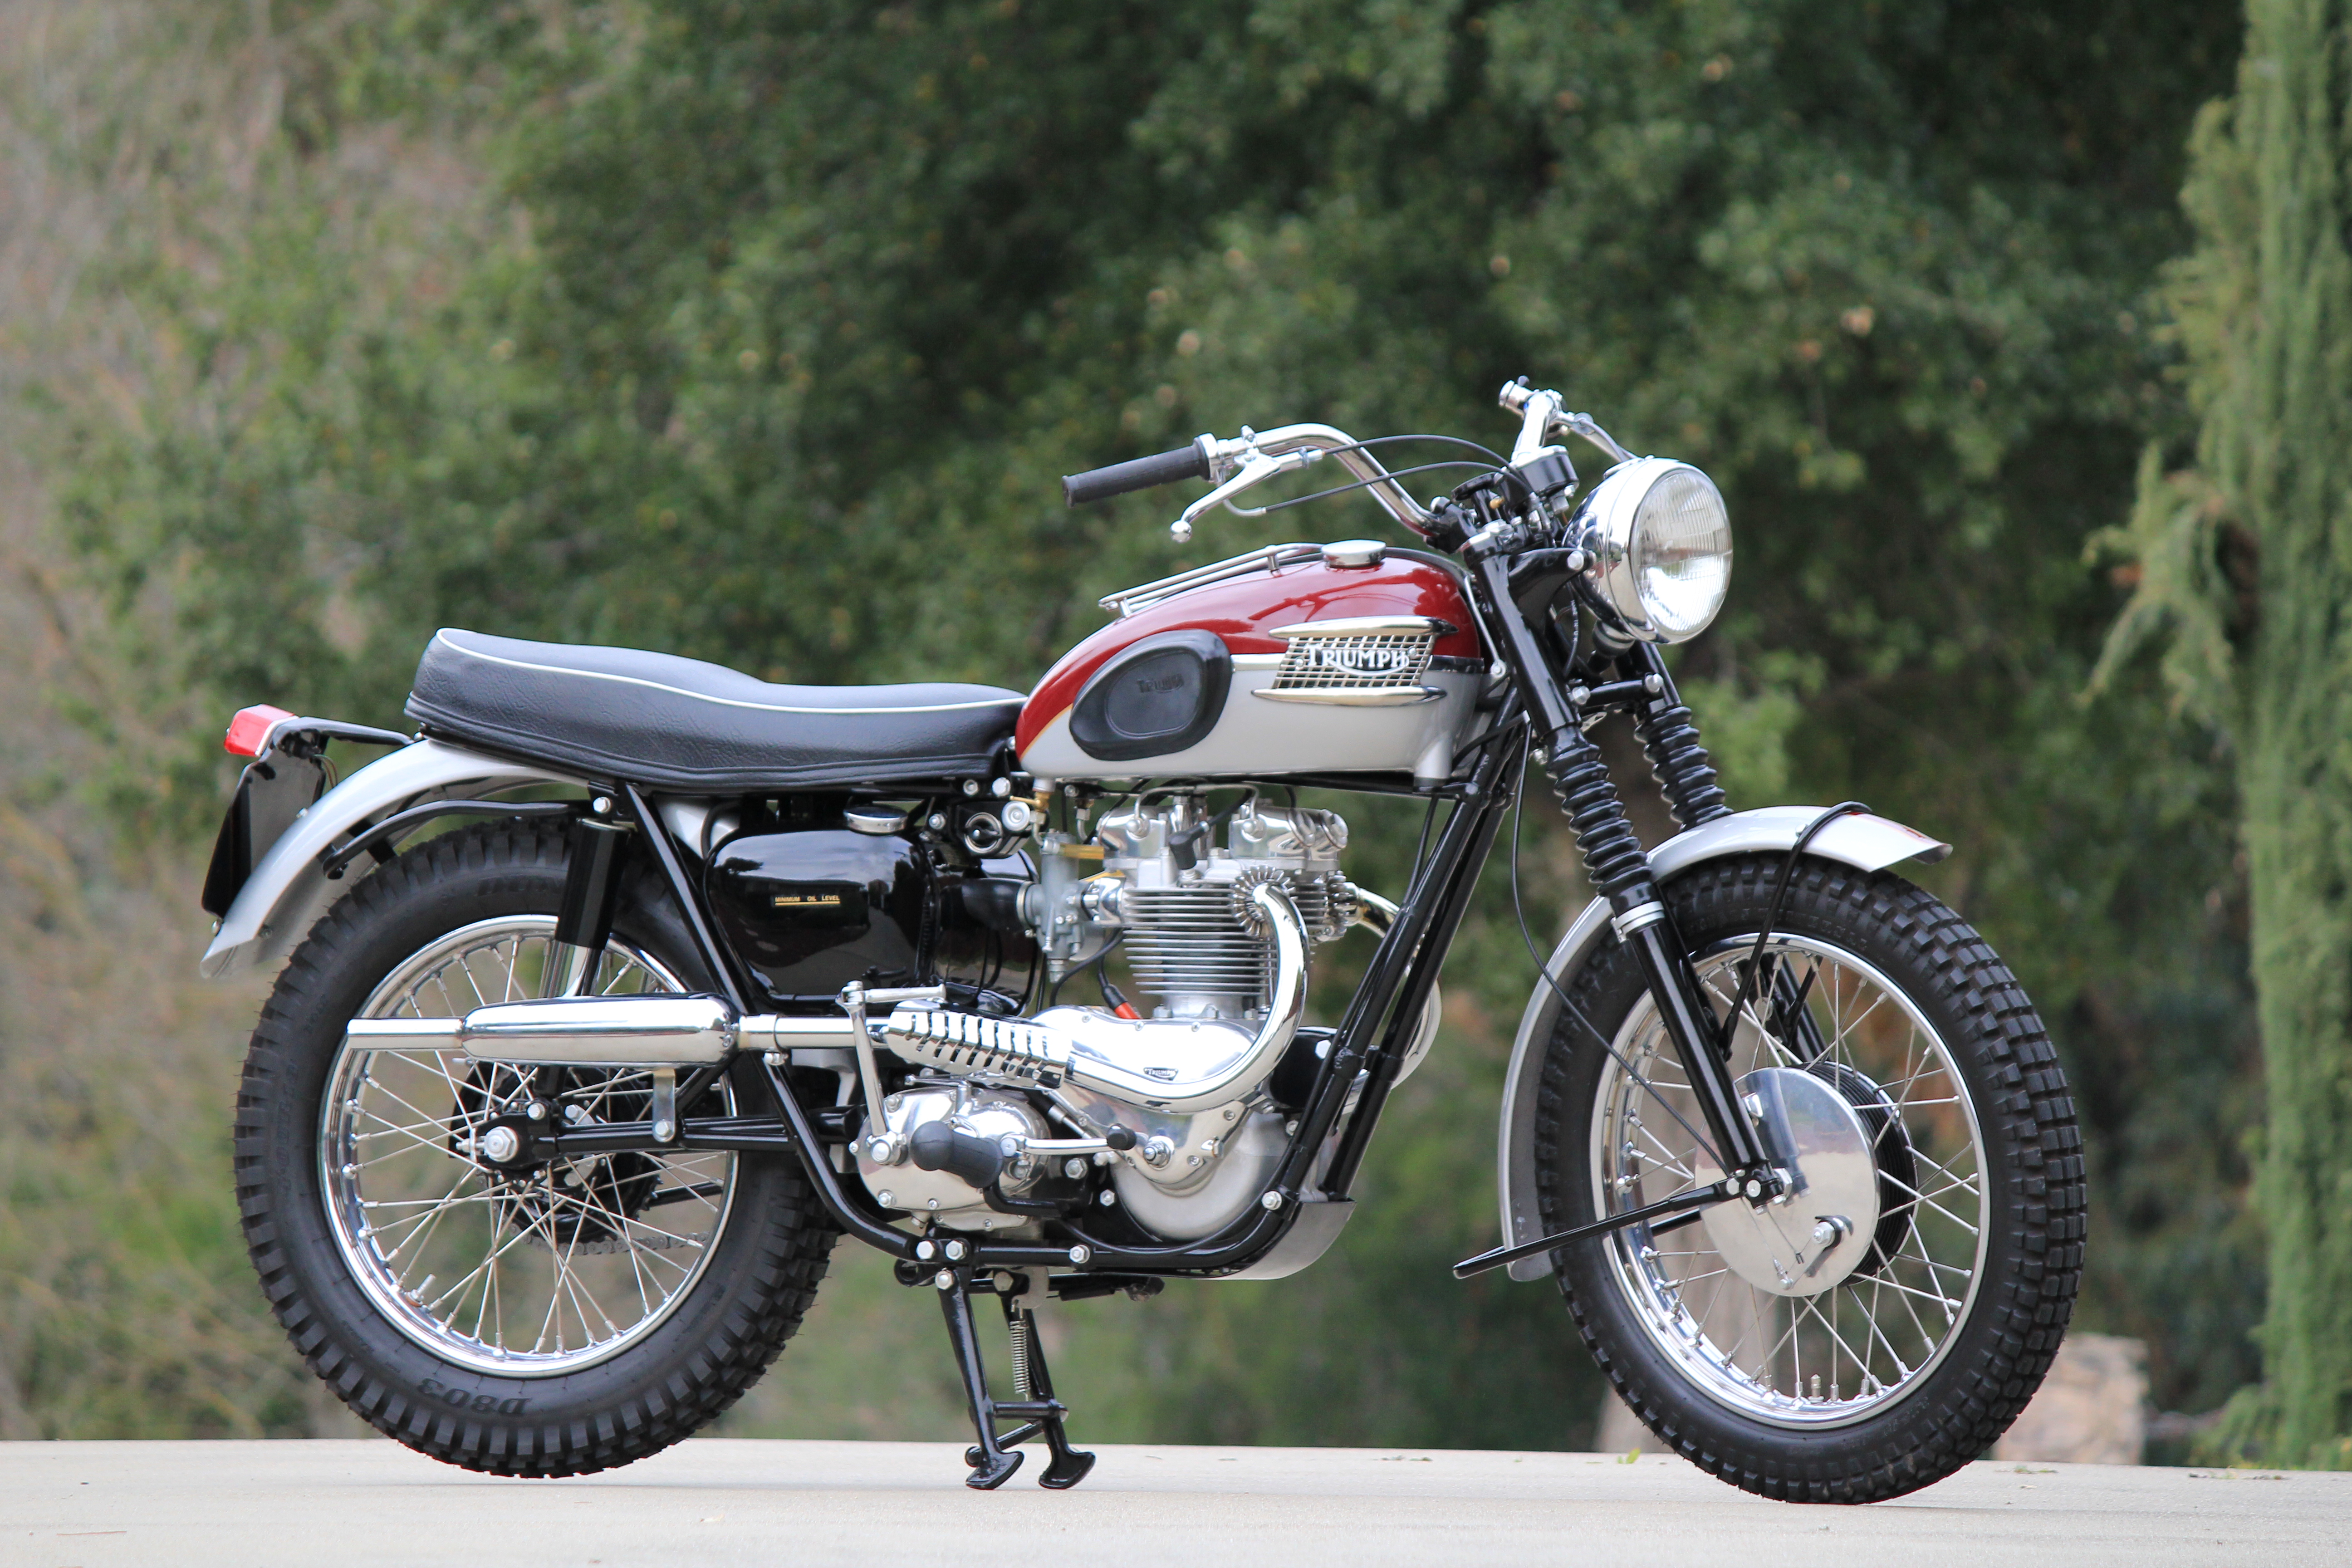 Triumph TR6 Motorcycle For Sale - image #112